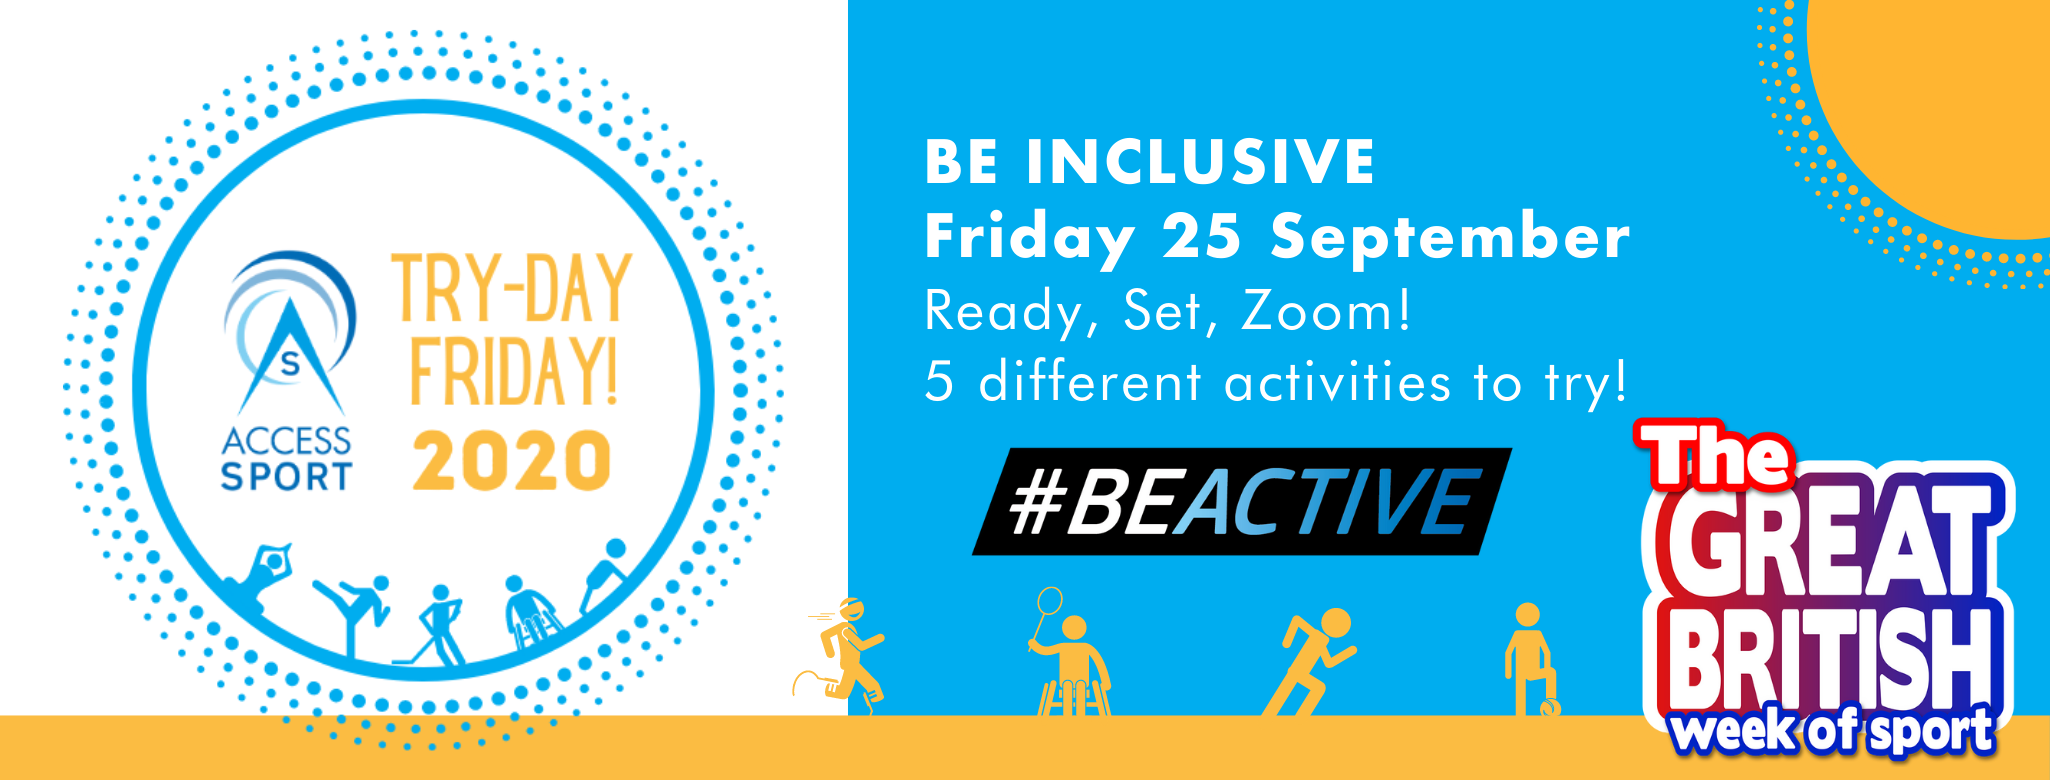 Try-Day Friday 2020. Friday 25 September. Ready, Set, Zoom! 5 different activities to try. #BeActive